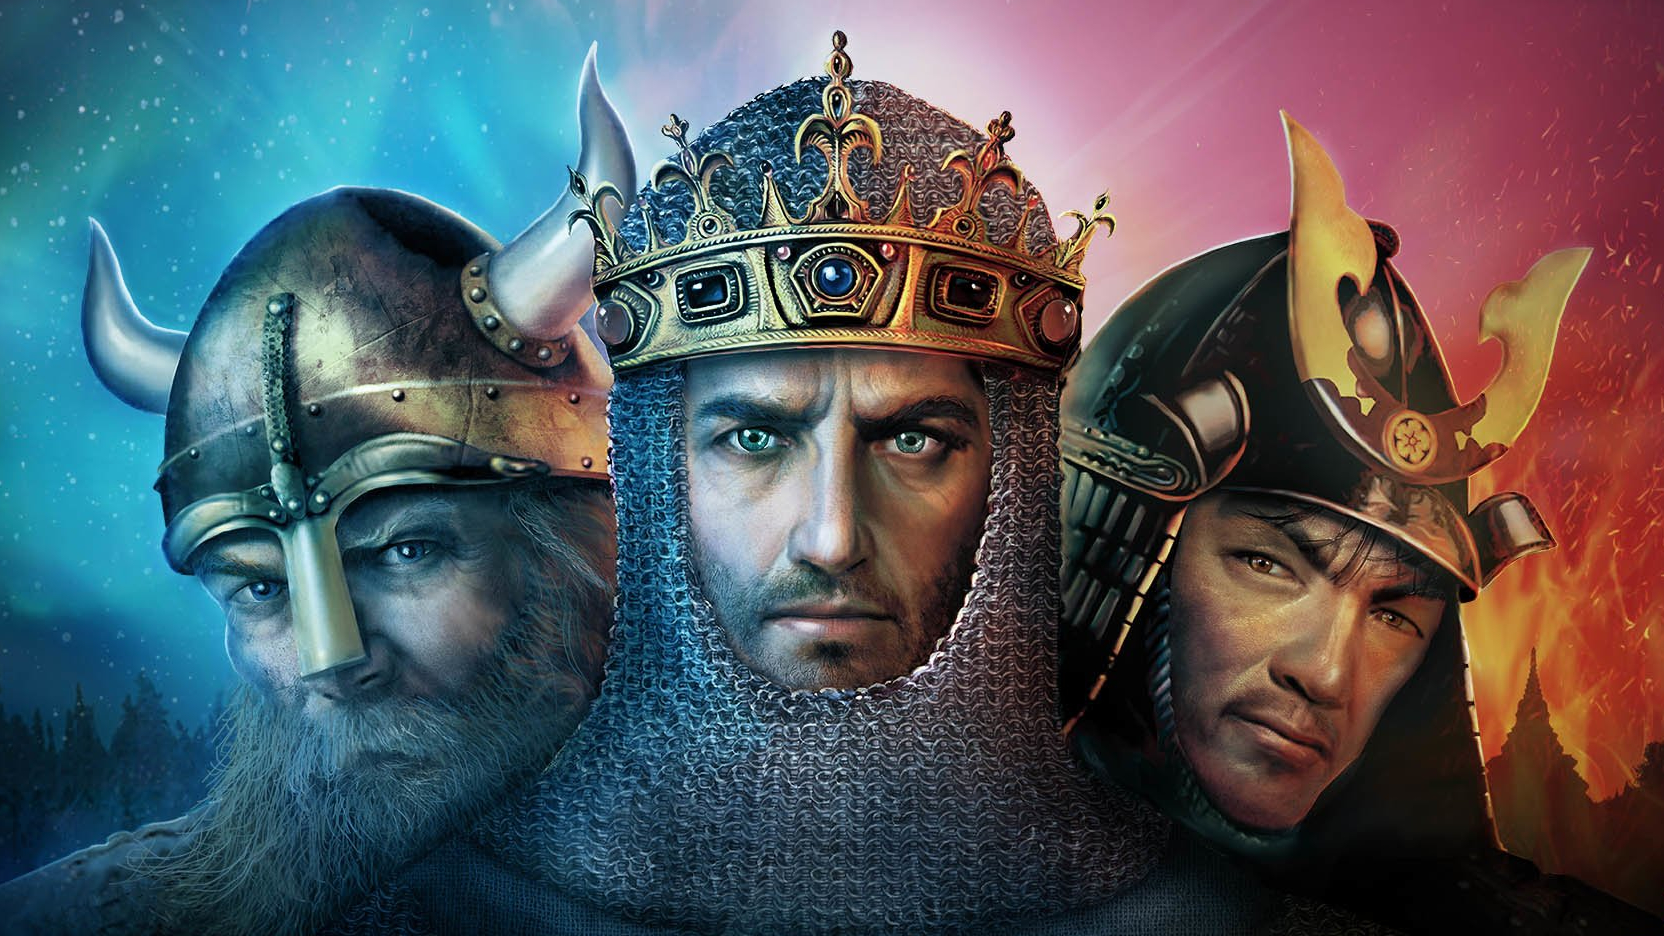 Age of Empires II the age of Kings. Age of Empires II HD. Age of Empires 2 обои. Age of Empires II: Definitive Edition.